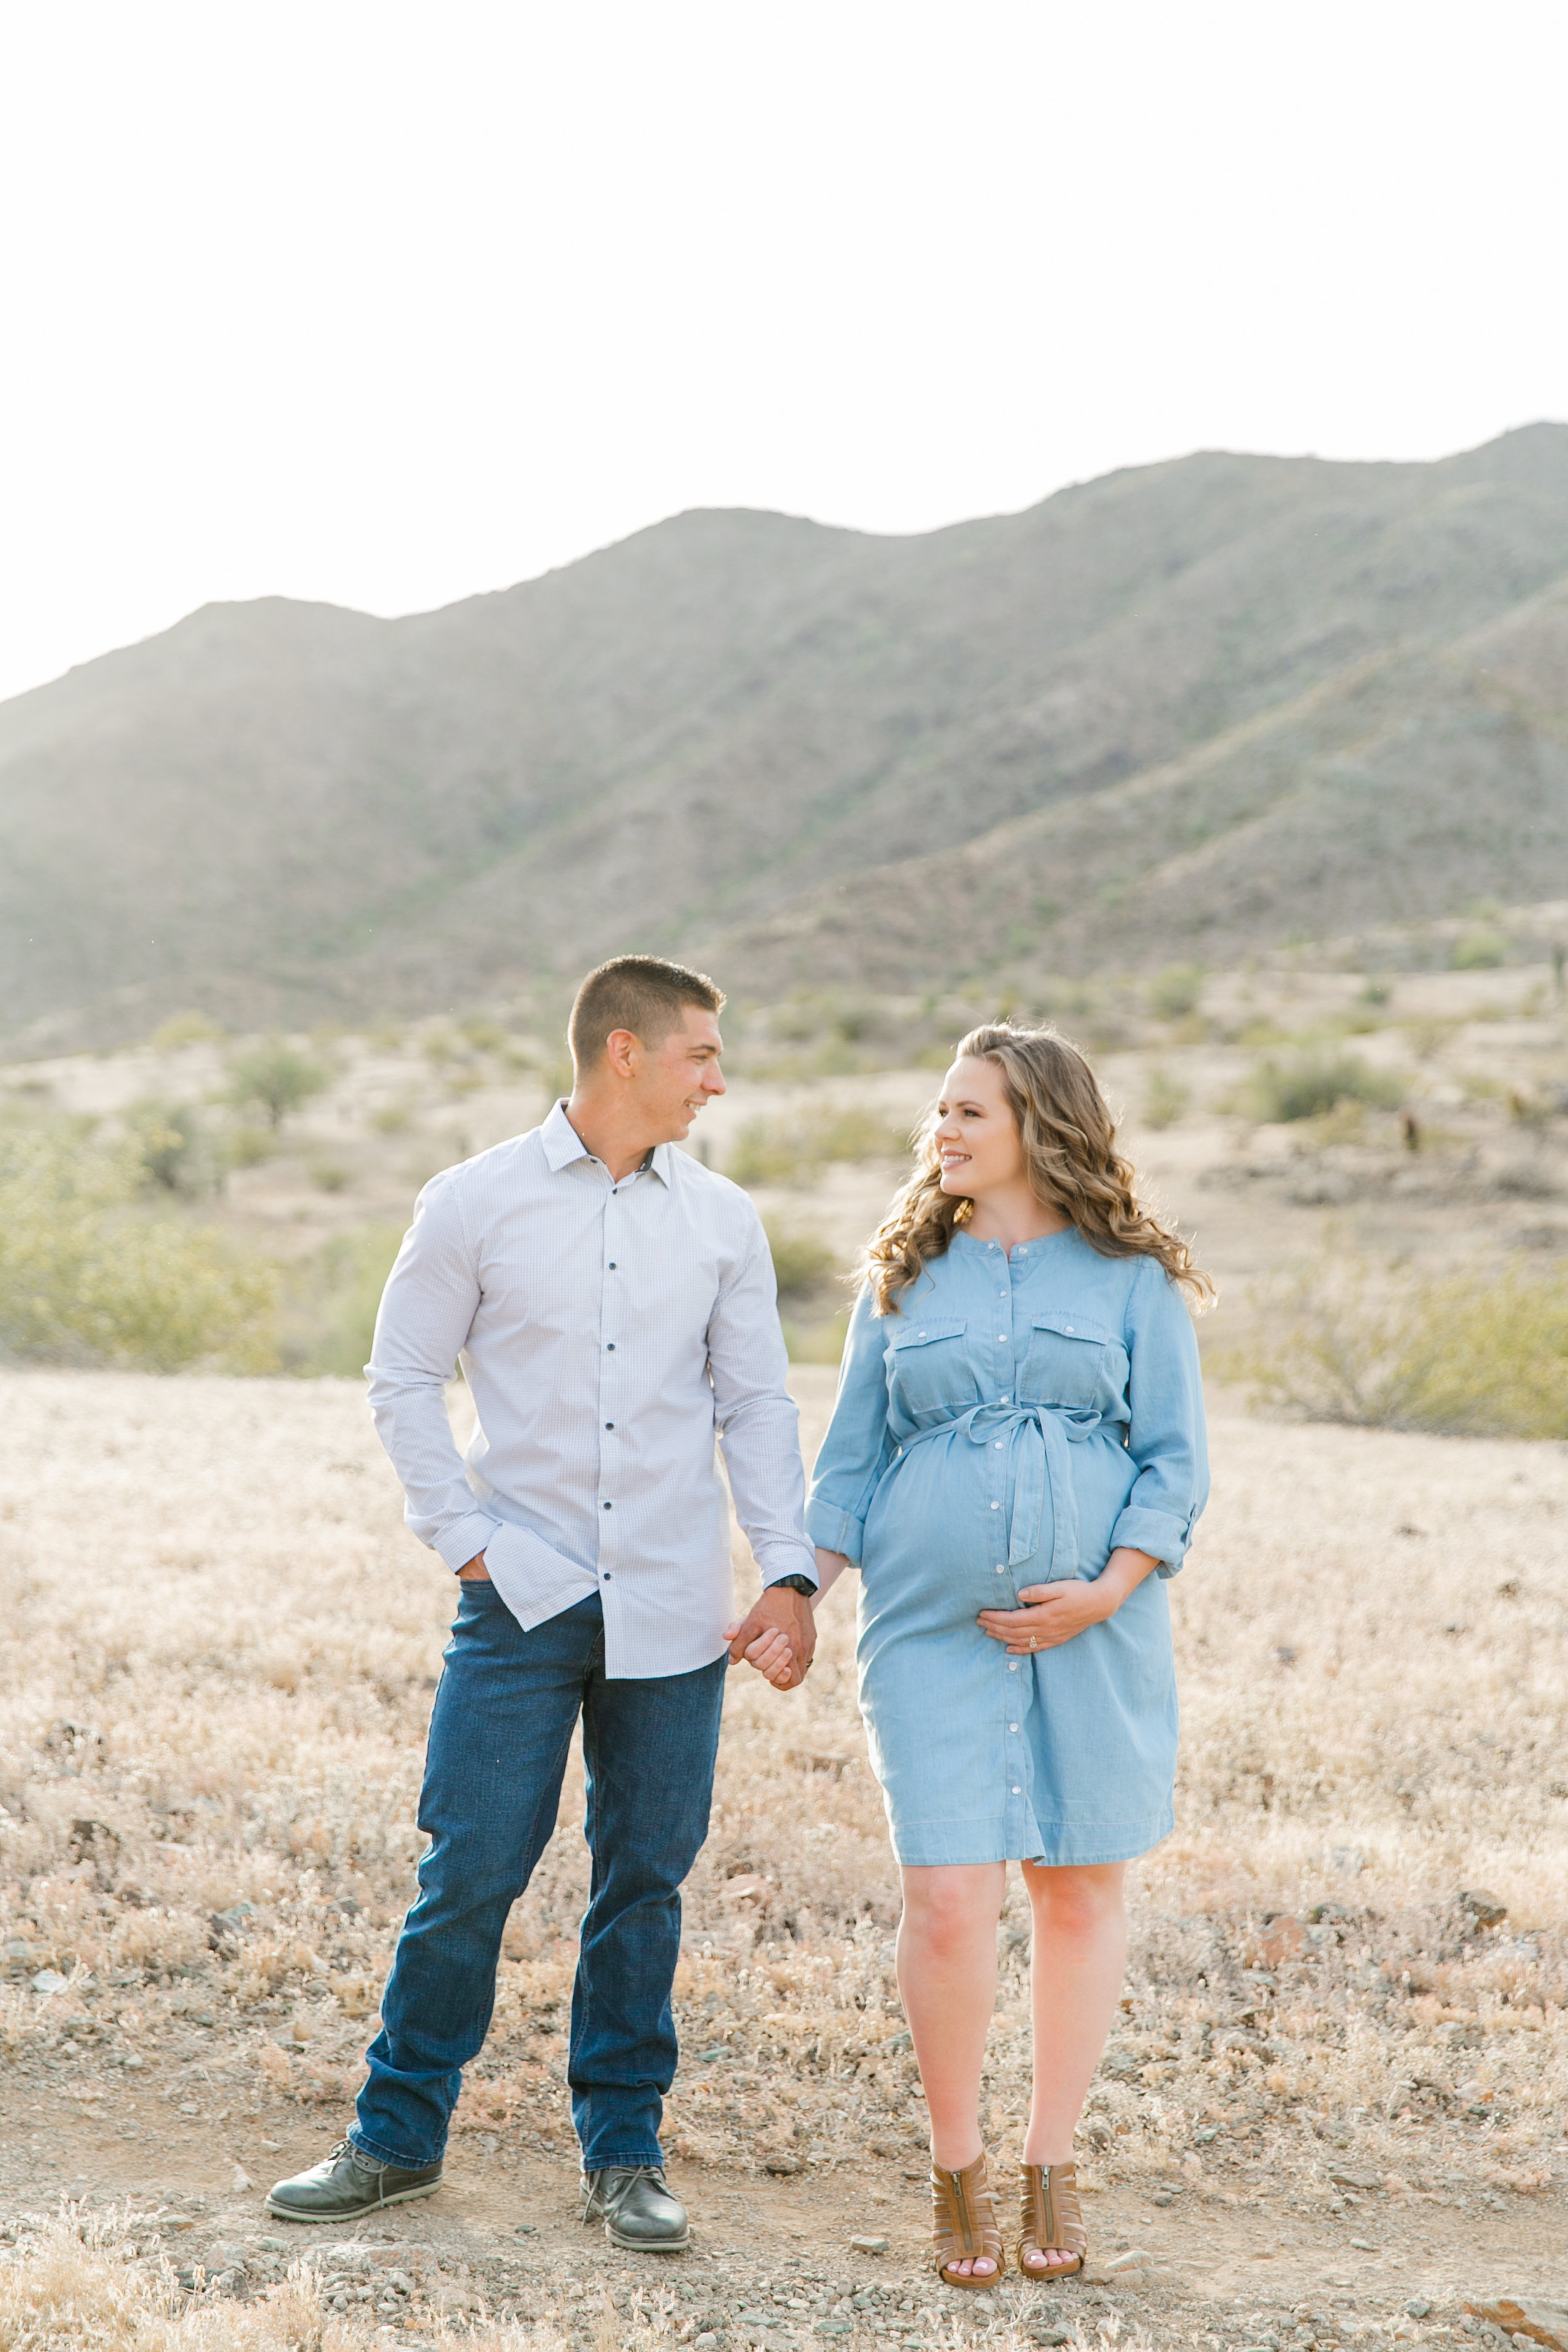 Karlie Colleen Photography - Arizona Maternity Photography - Brittany & Kyle-63